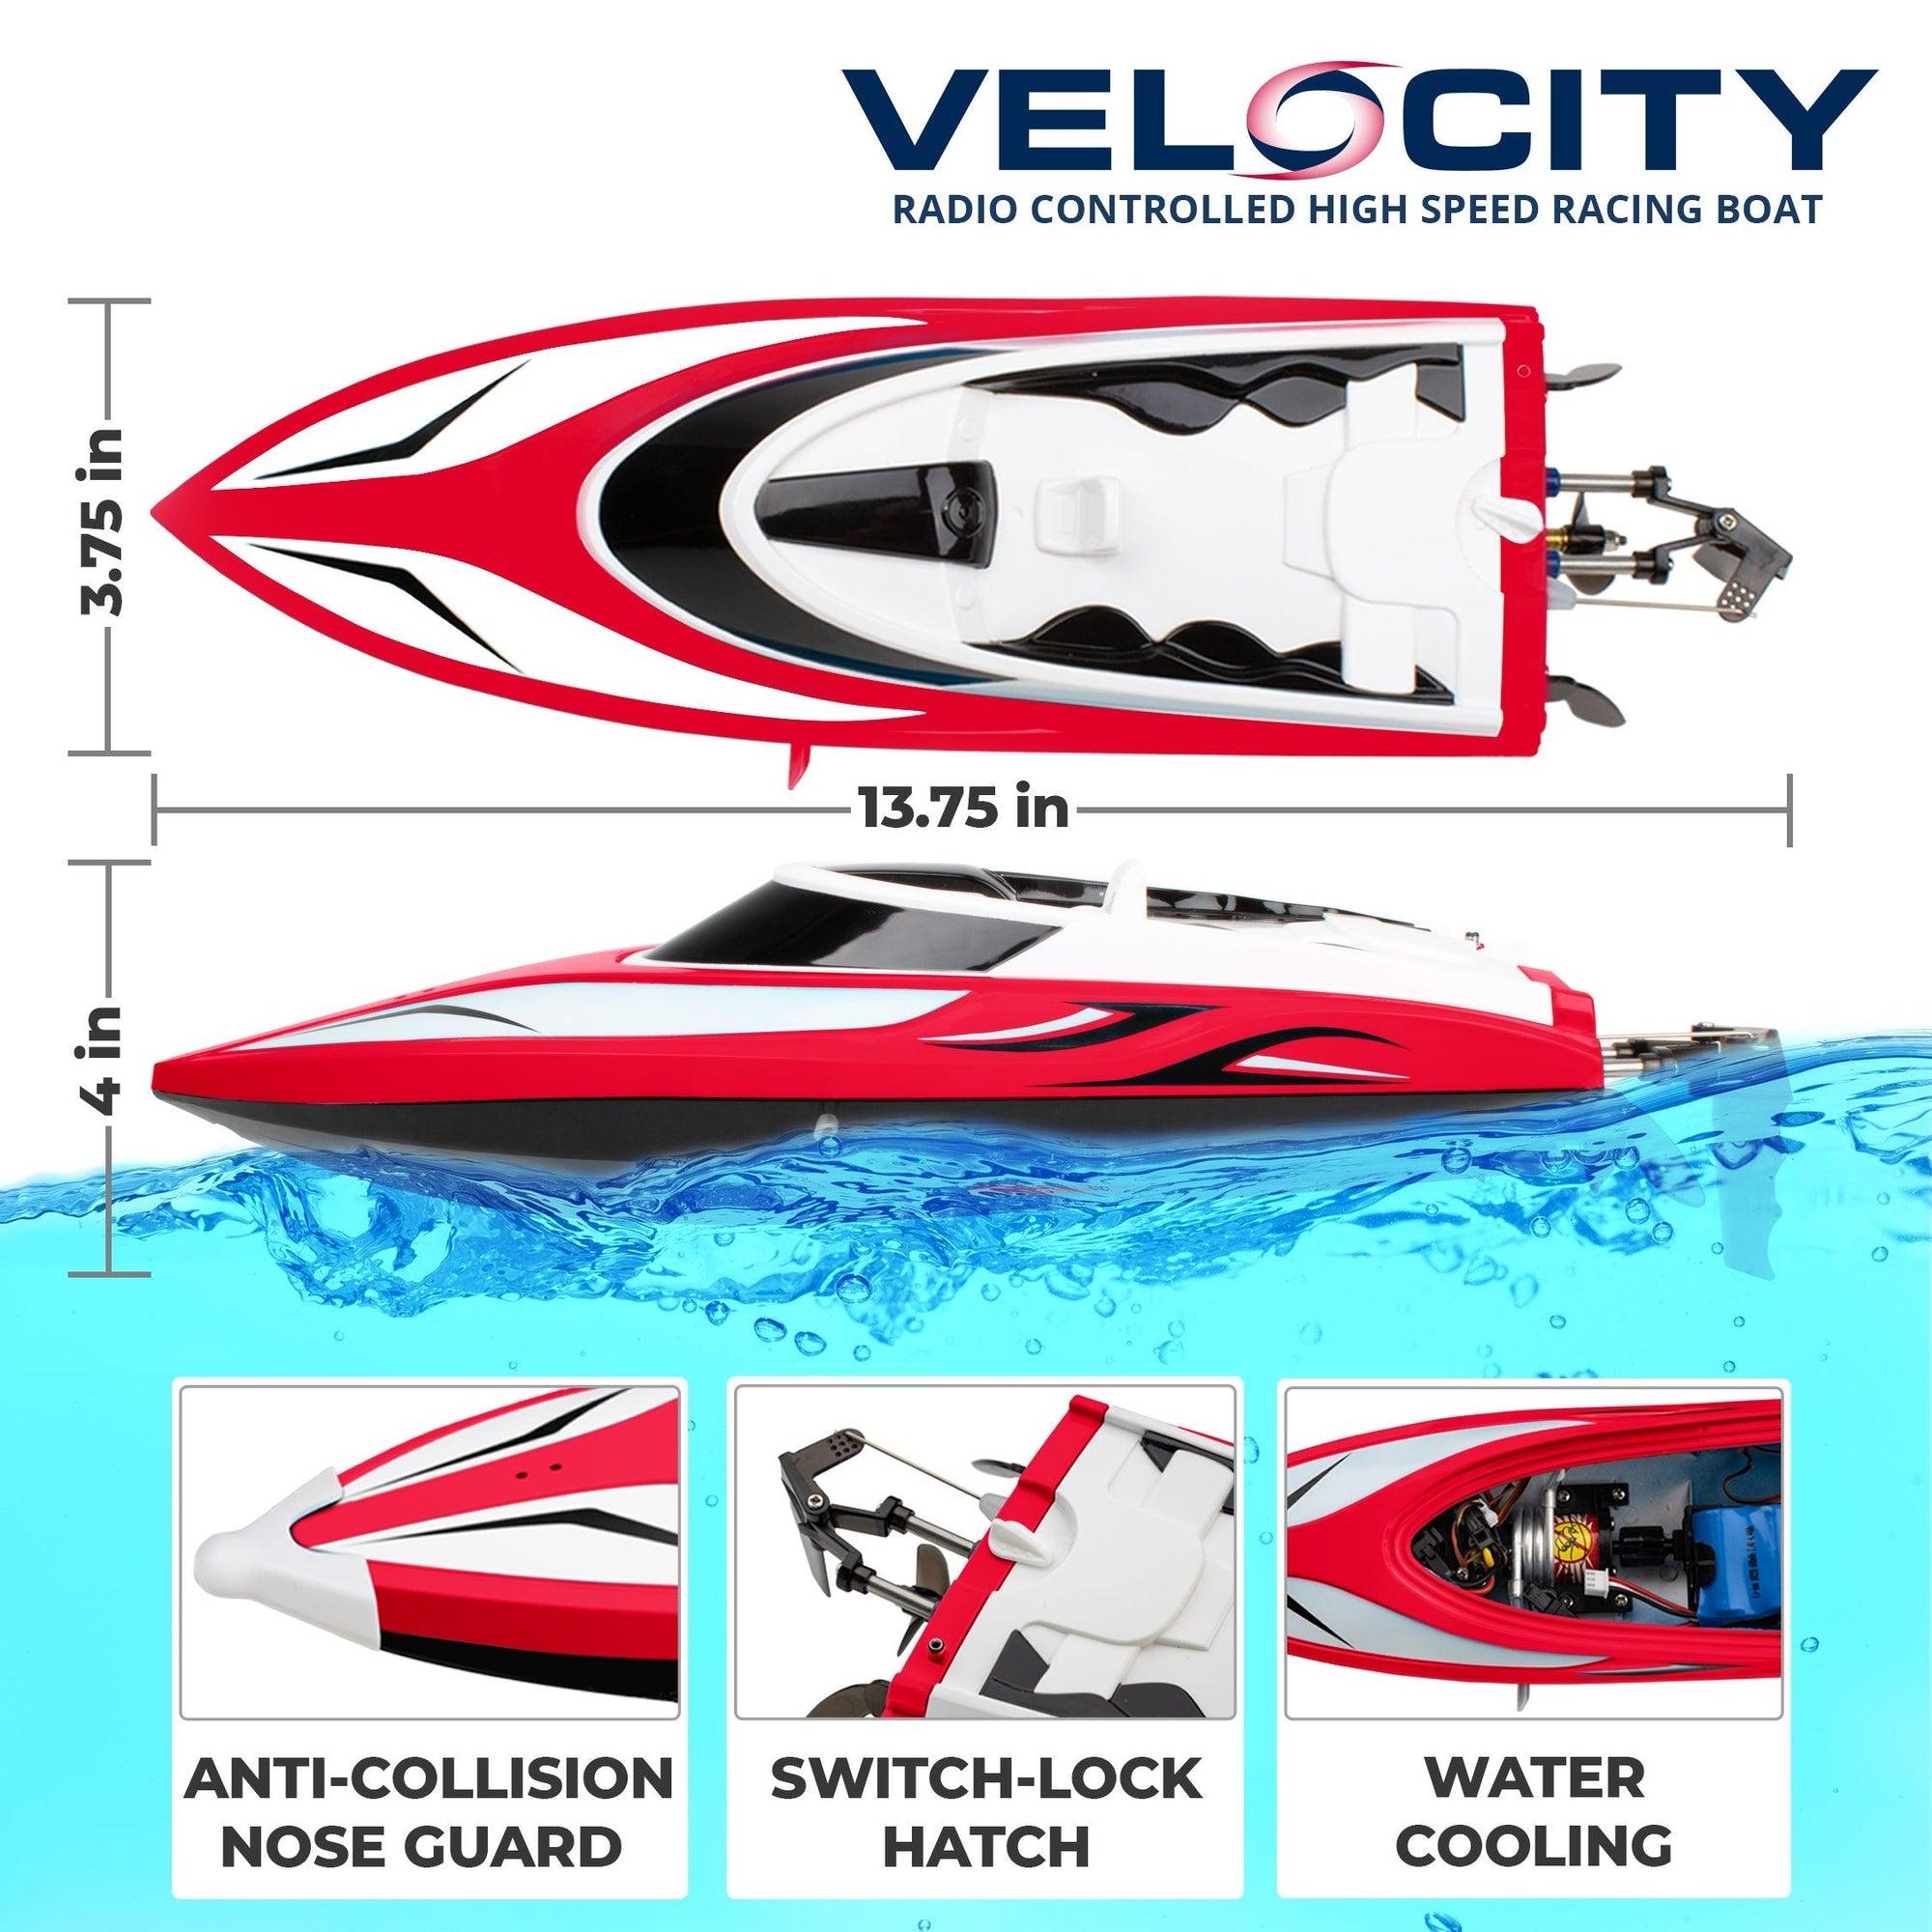 Rc Power Boats For Sale: How to Properly Maintain and Care for RC Power Boats: A Comprehensive Guide